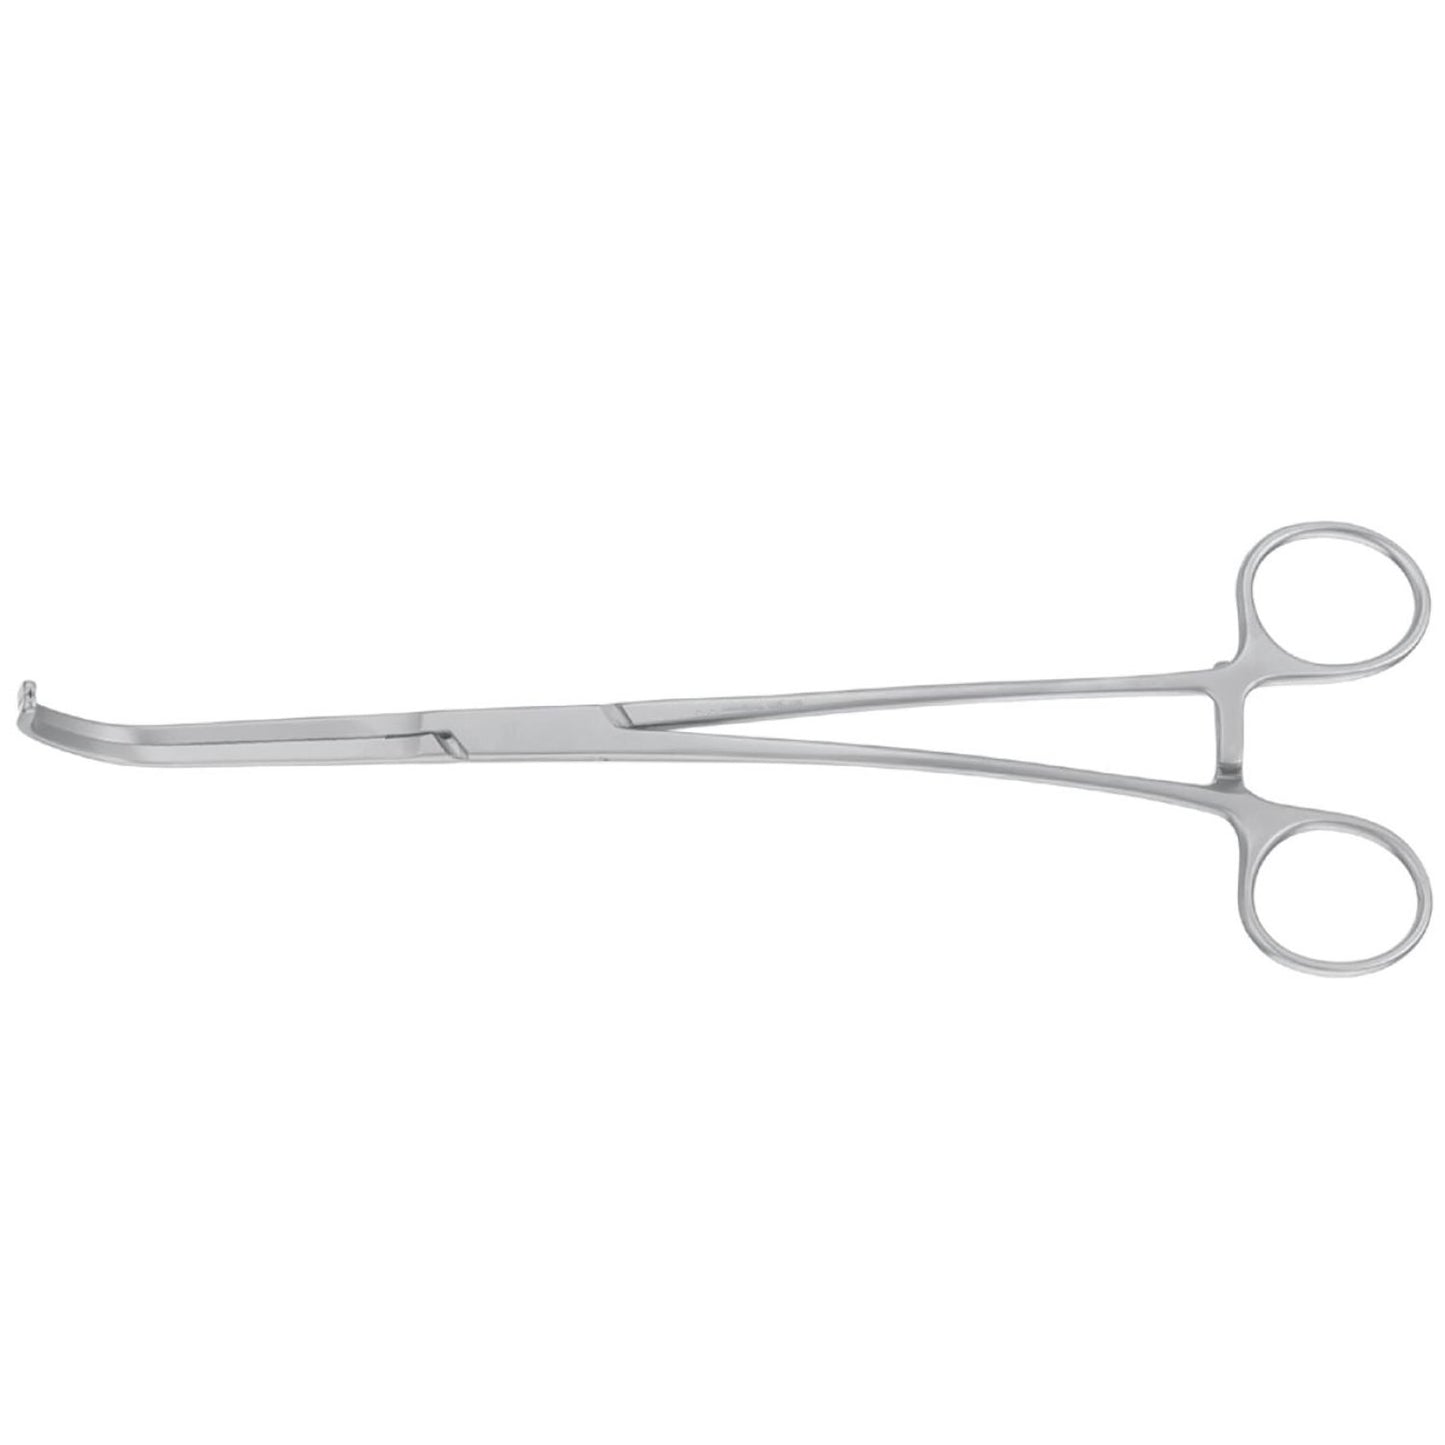 Cooley Auricular Appendage Forceps